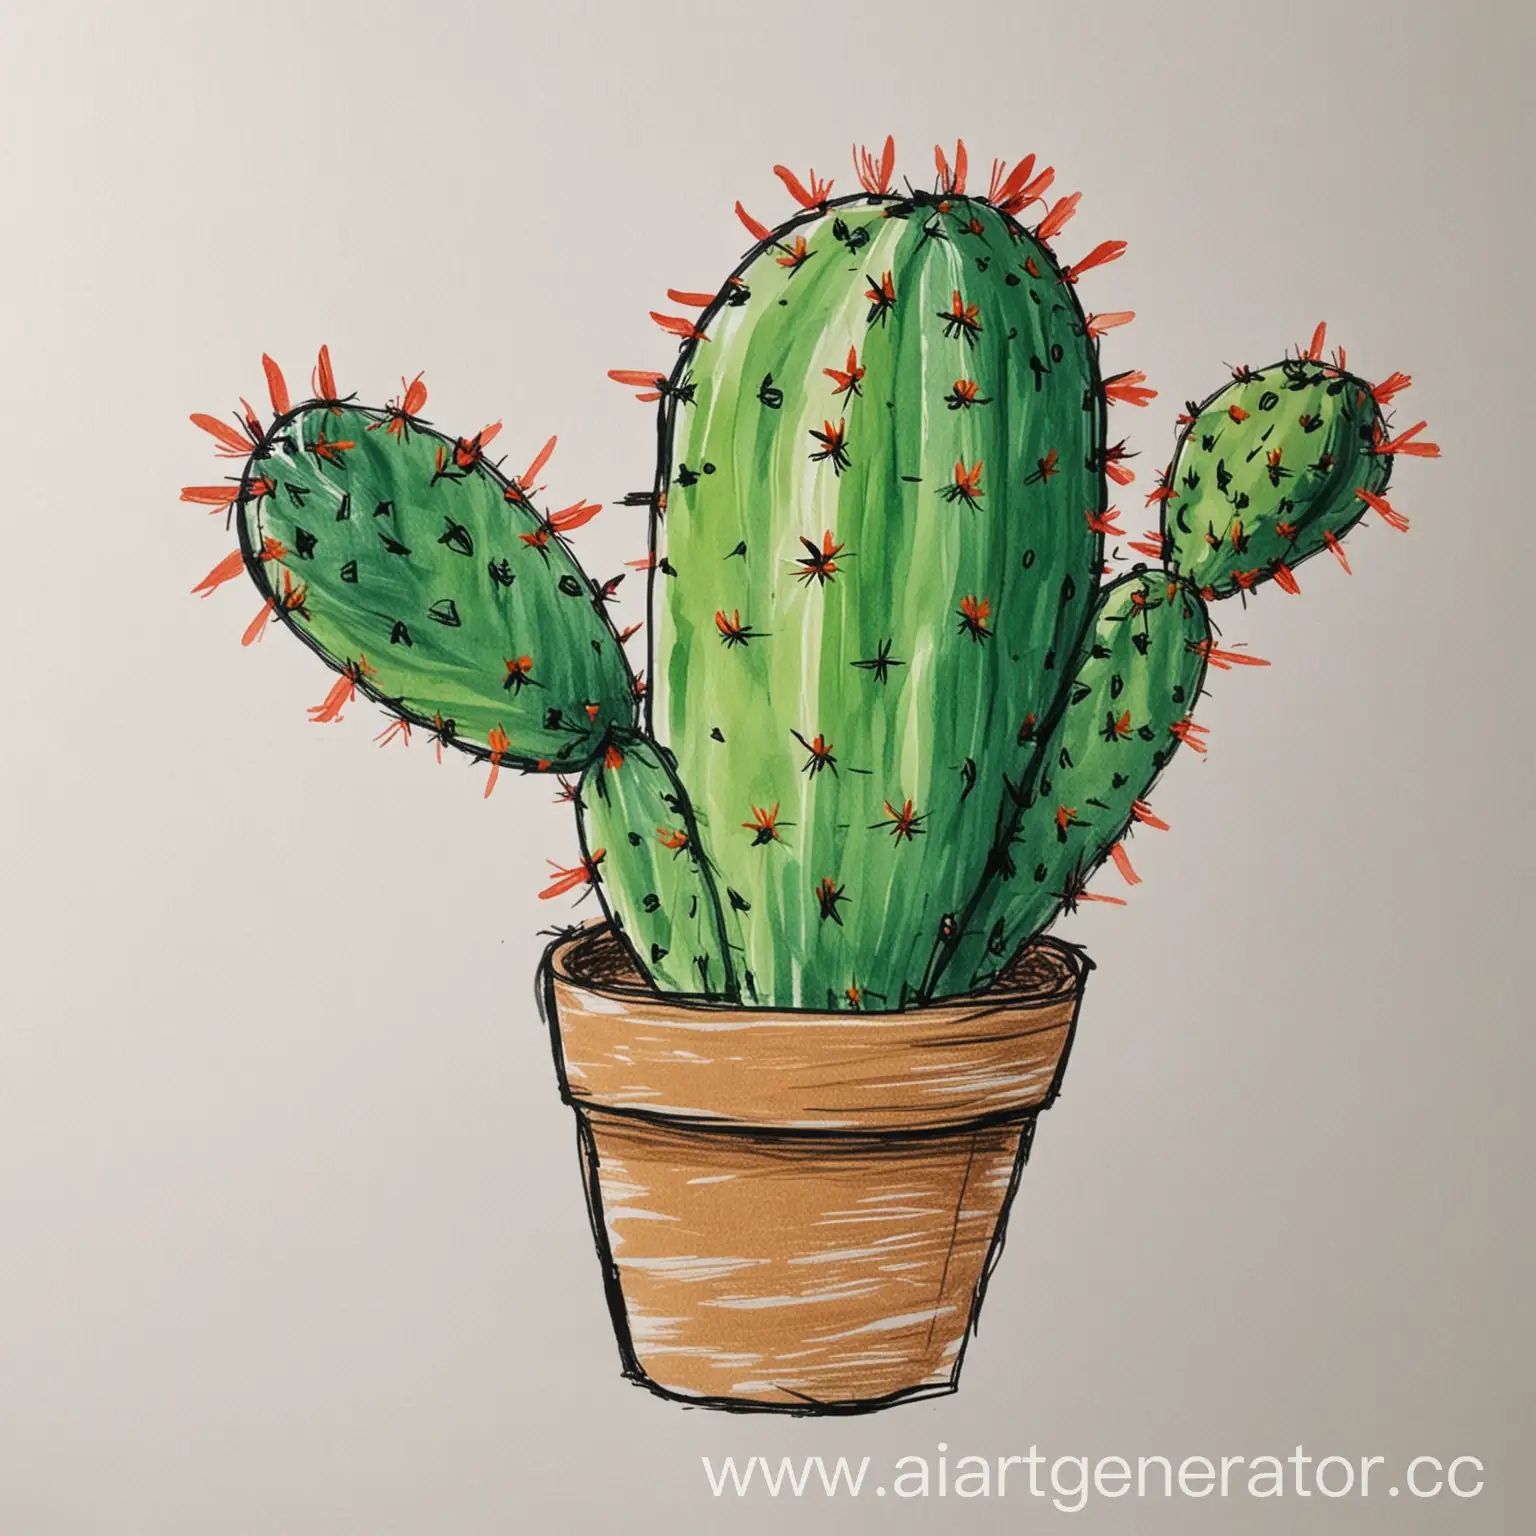 On a piece of white paper, draw a cactus as you imagine it. A child's drawing